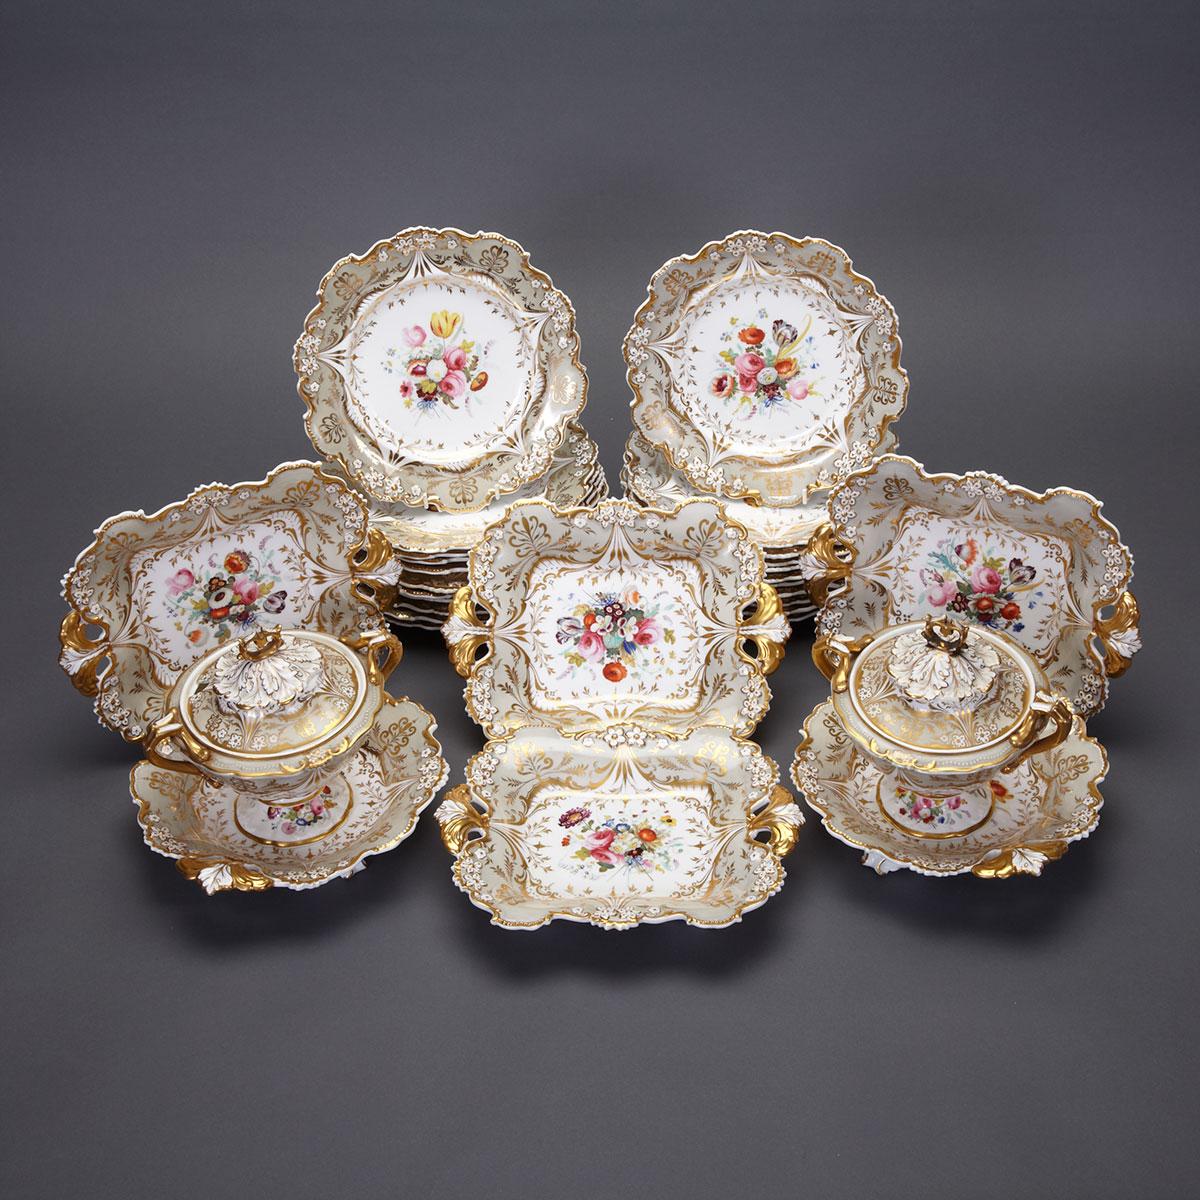 Davenport Grey and Gilt Banded Dessert Service, mid-19th century